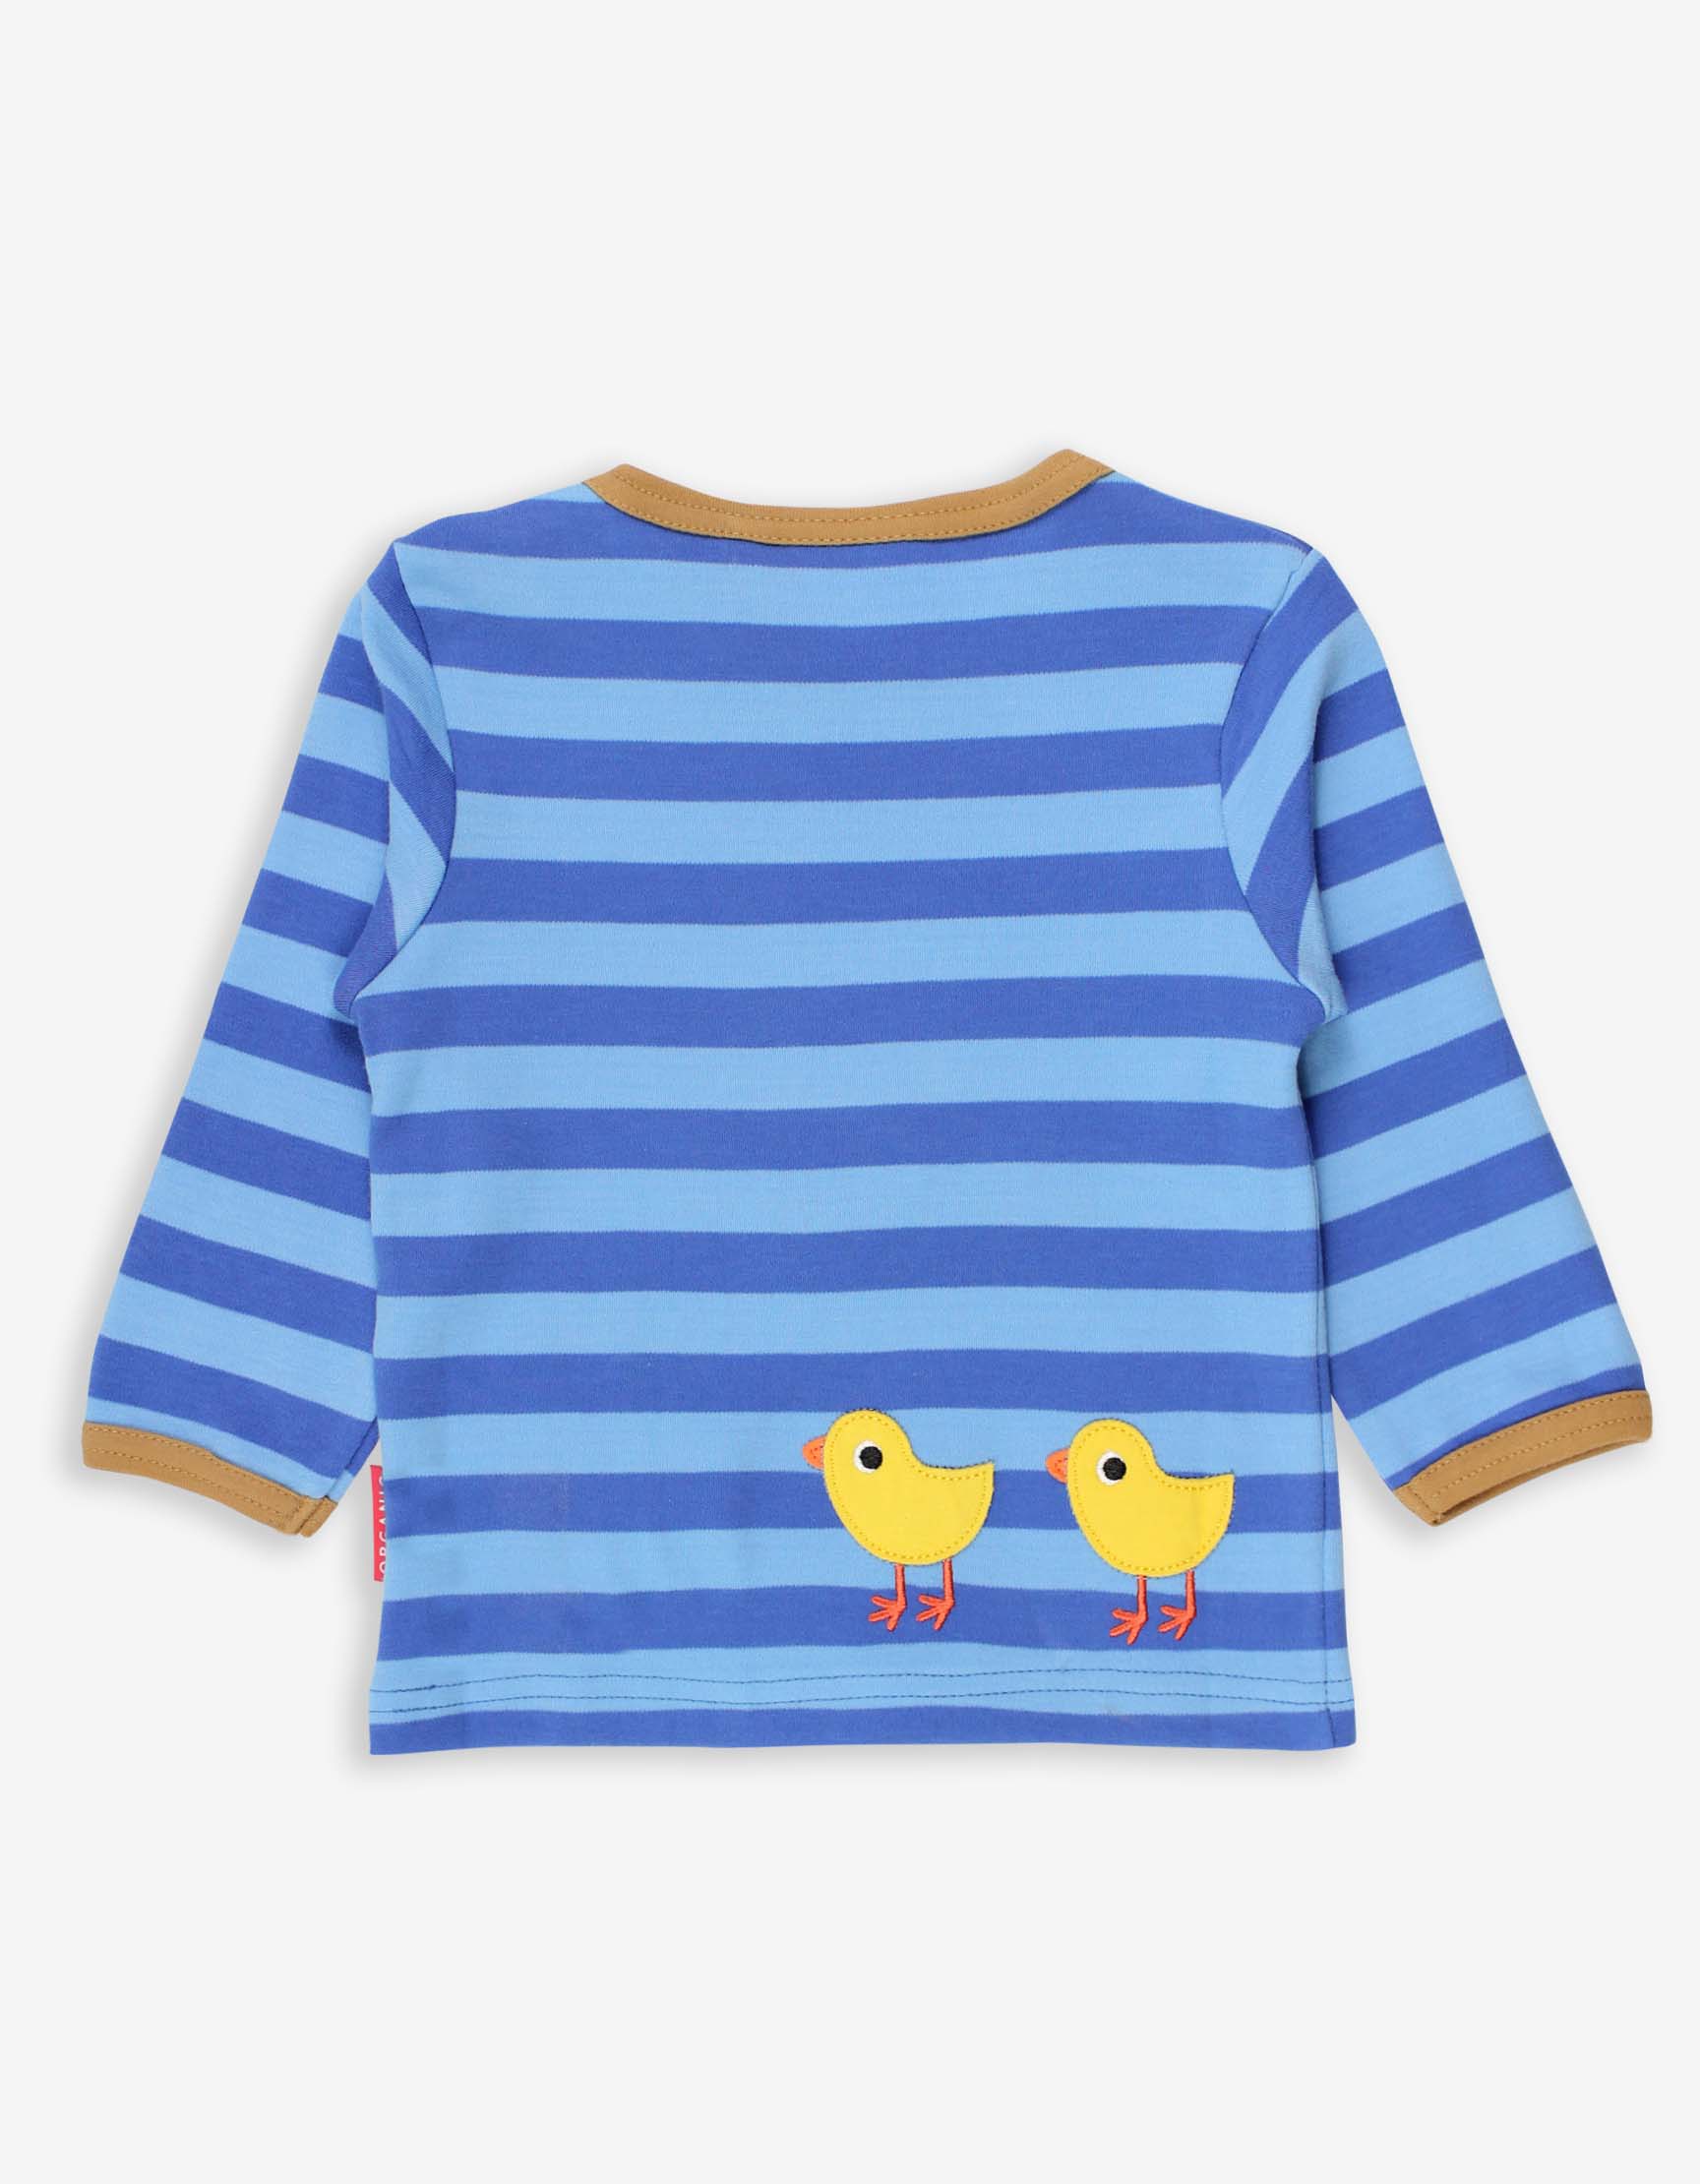 Toby Tiger Organic Long Sleeve T-Shirt - Clucky Chicken Applique